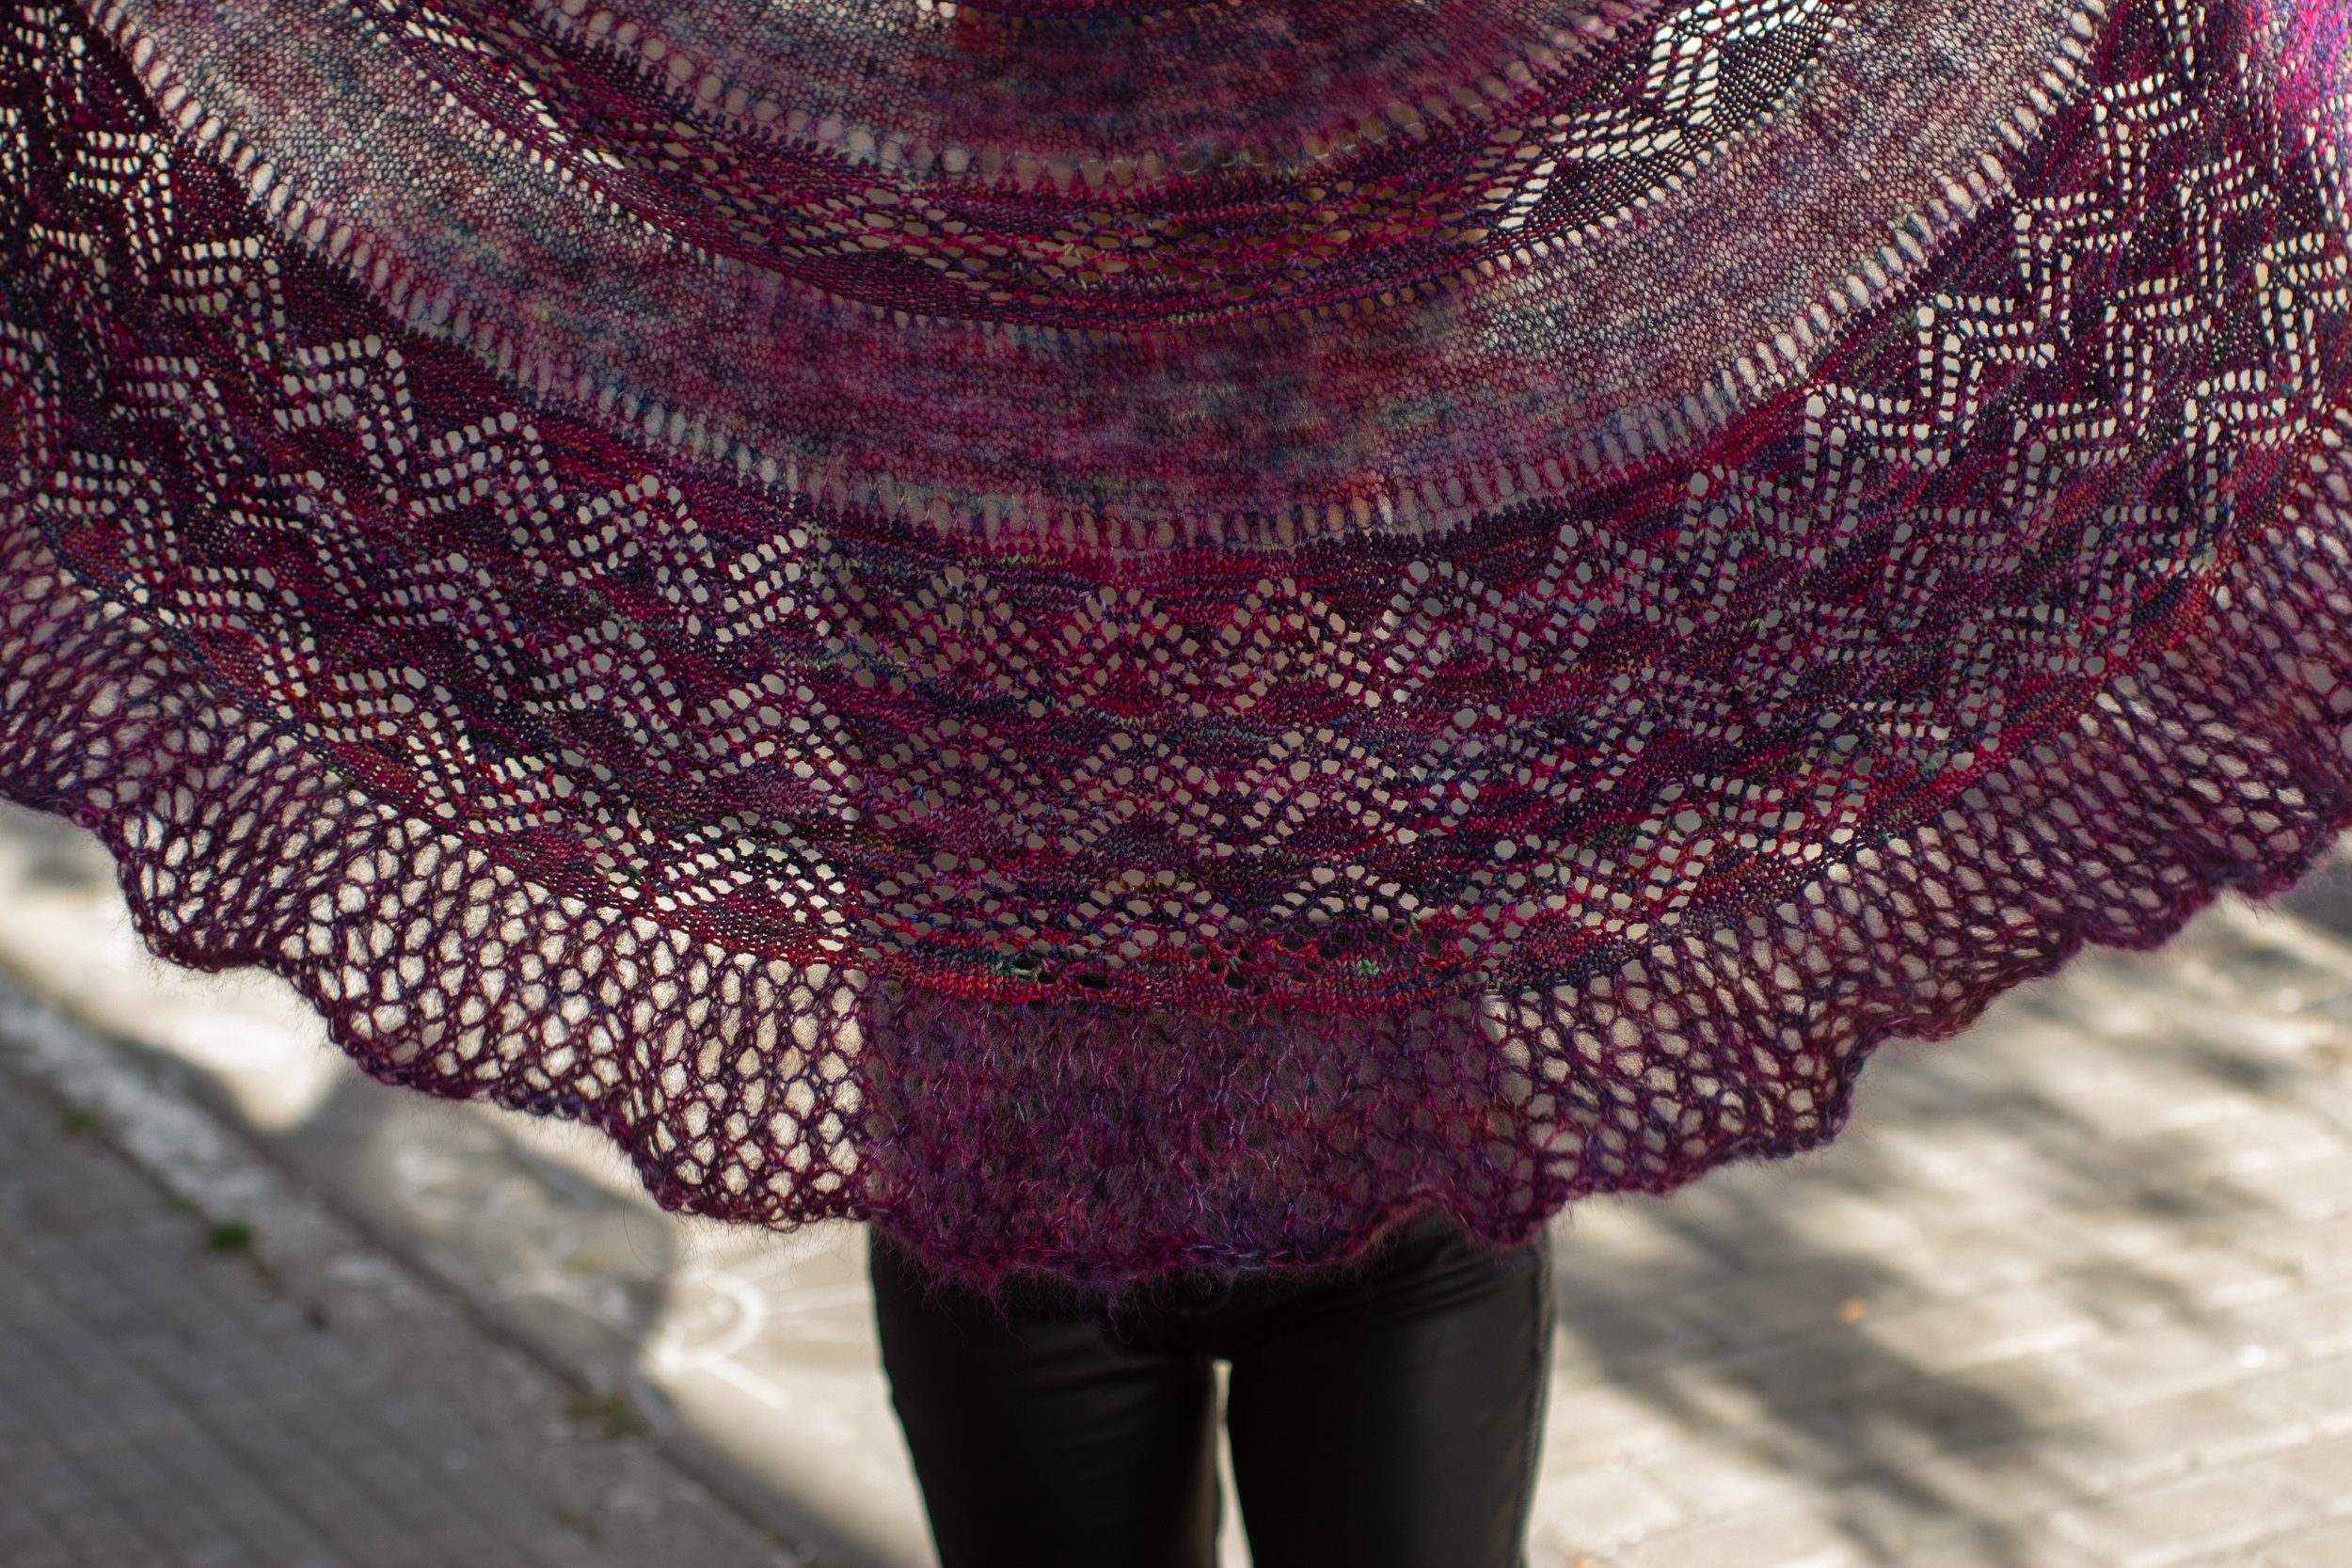 Assigned pooling colorways, new from Dream in Color Pop-Up Club